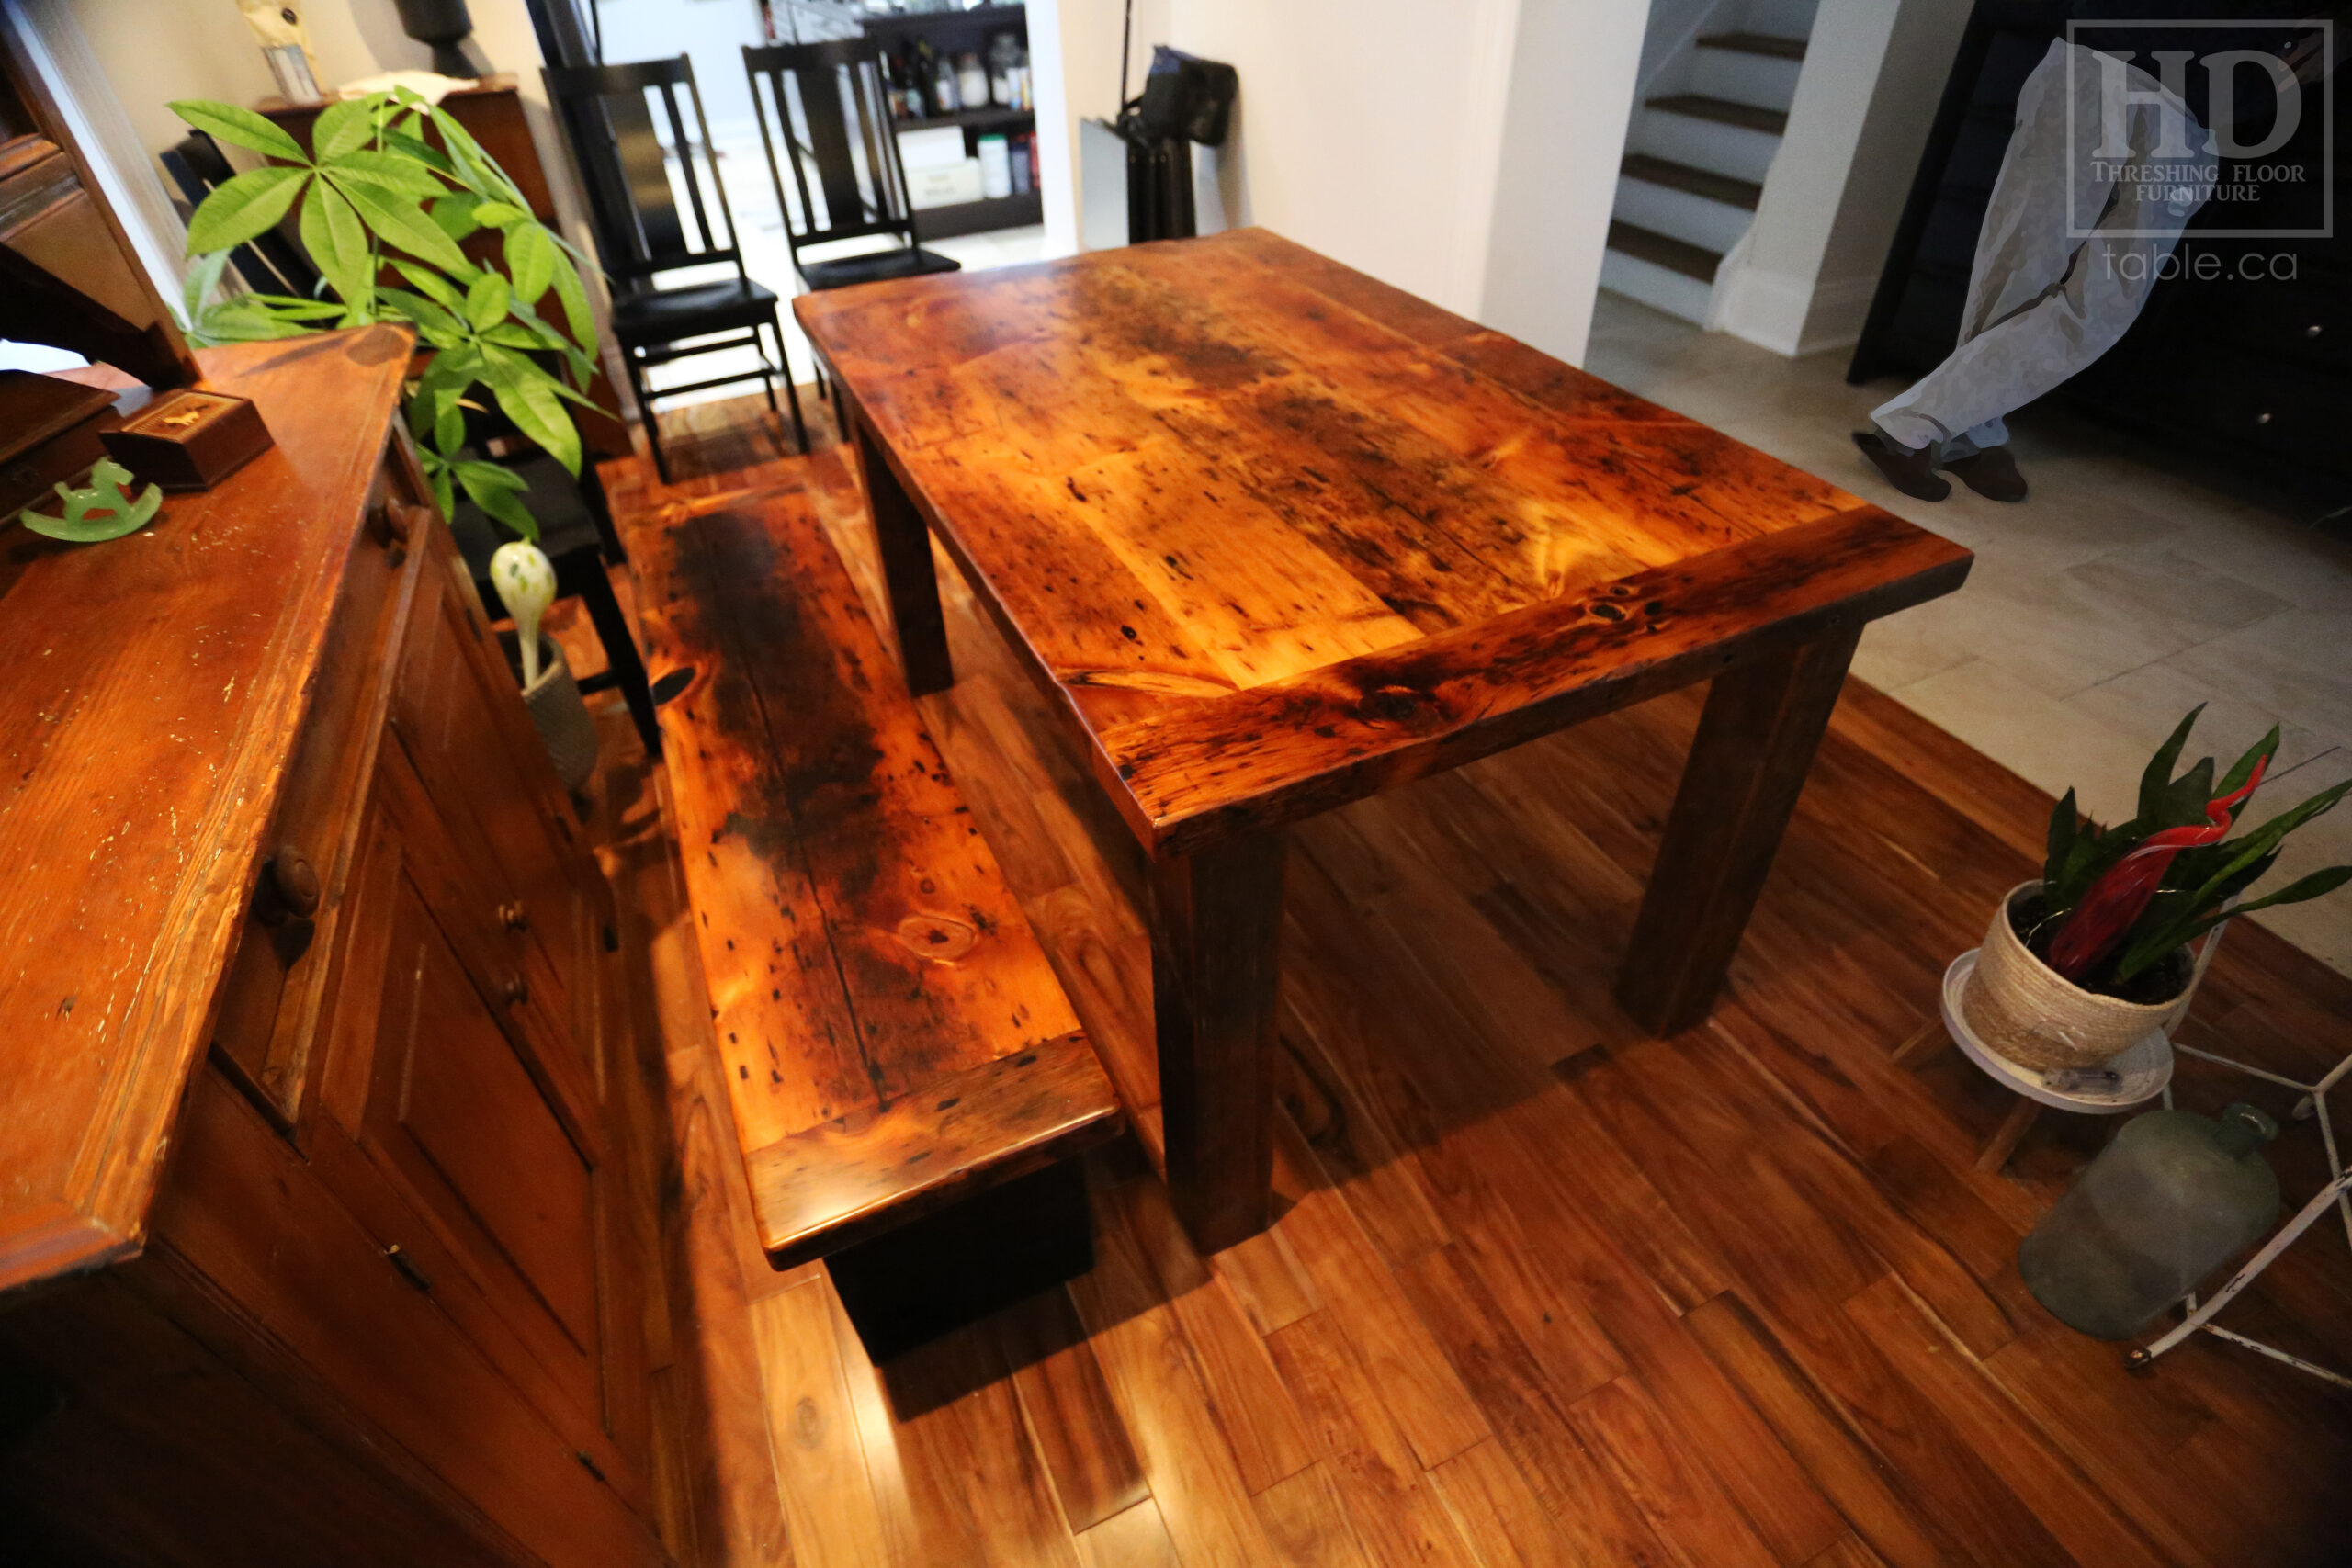 Old Growth Pine Reclaimed [Ontario] Barnwood Table we made for a Mississauga home - 5' length - 42" wide - Harvest Base: Straight 4"x4" Windbrace Beam Legs - Pine Threshing Floor Construction - Original edges & distressing maintained - Premium epoxy + satin polyurethane finish - 5' [matching] Plank Base Bench - 4 Modified Plank Back Chairs / Wormy Maple / Painted Black / Polyurethane clearcoat finish - www.table.ca